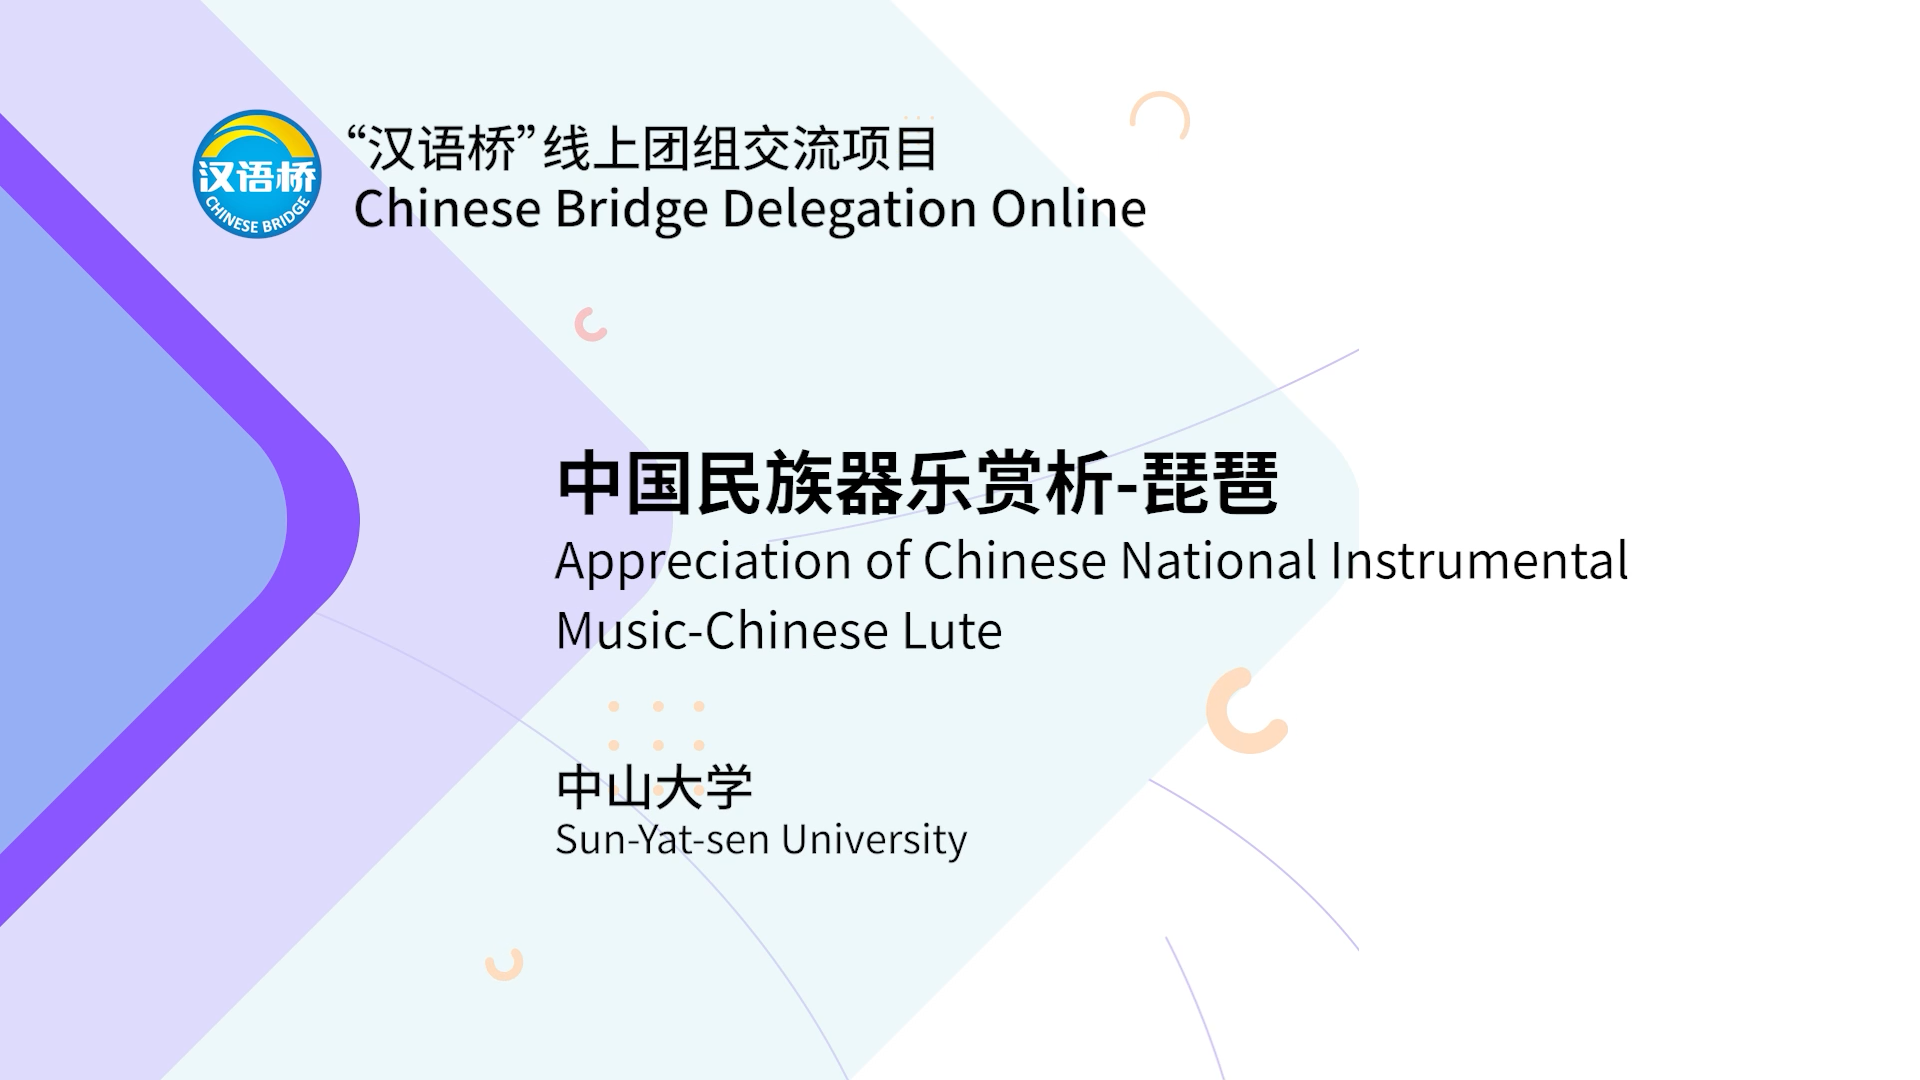 Appreciation of Chinese National Instrumental Music-Chinese Lute